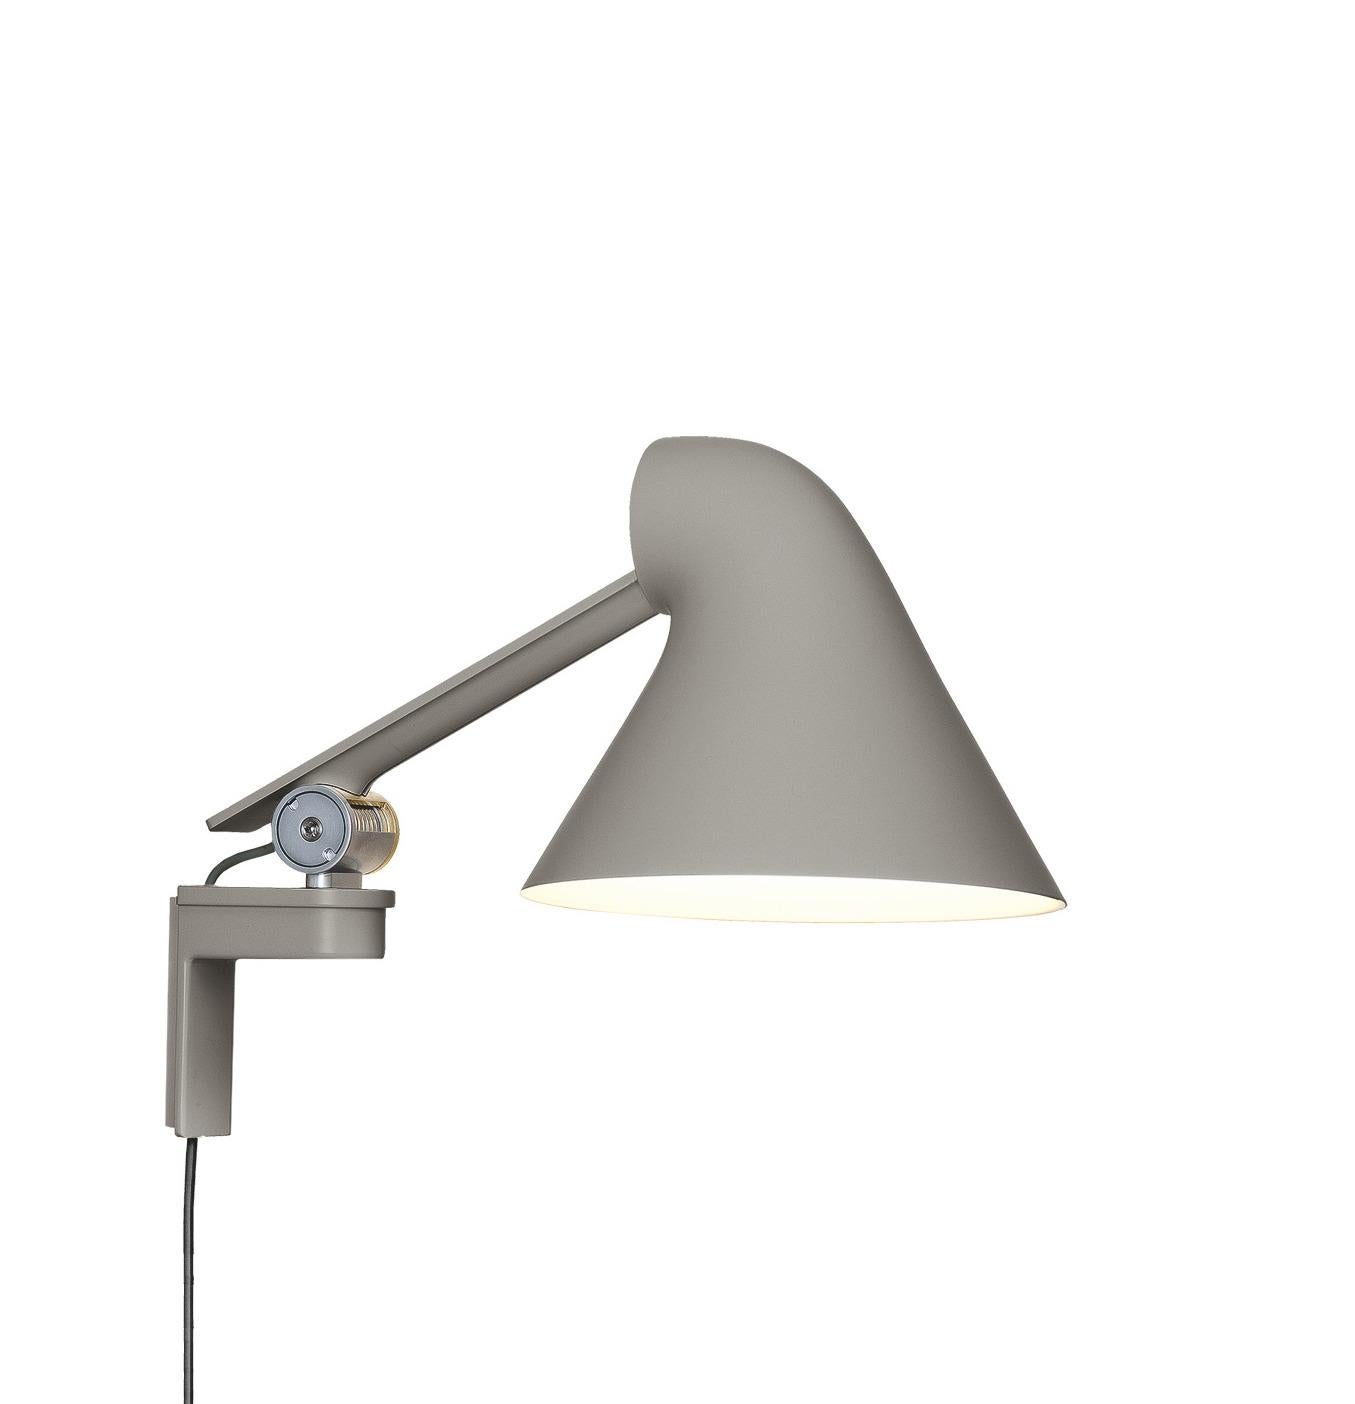 Louis Poulsen NJP Wall Short Lamp by Nendo, Oki Sato In New Condition For Sale In New York, NY